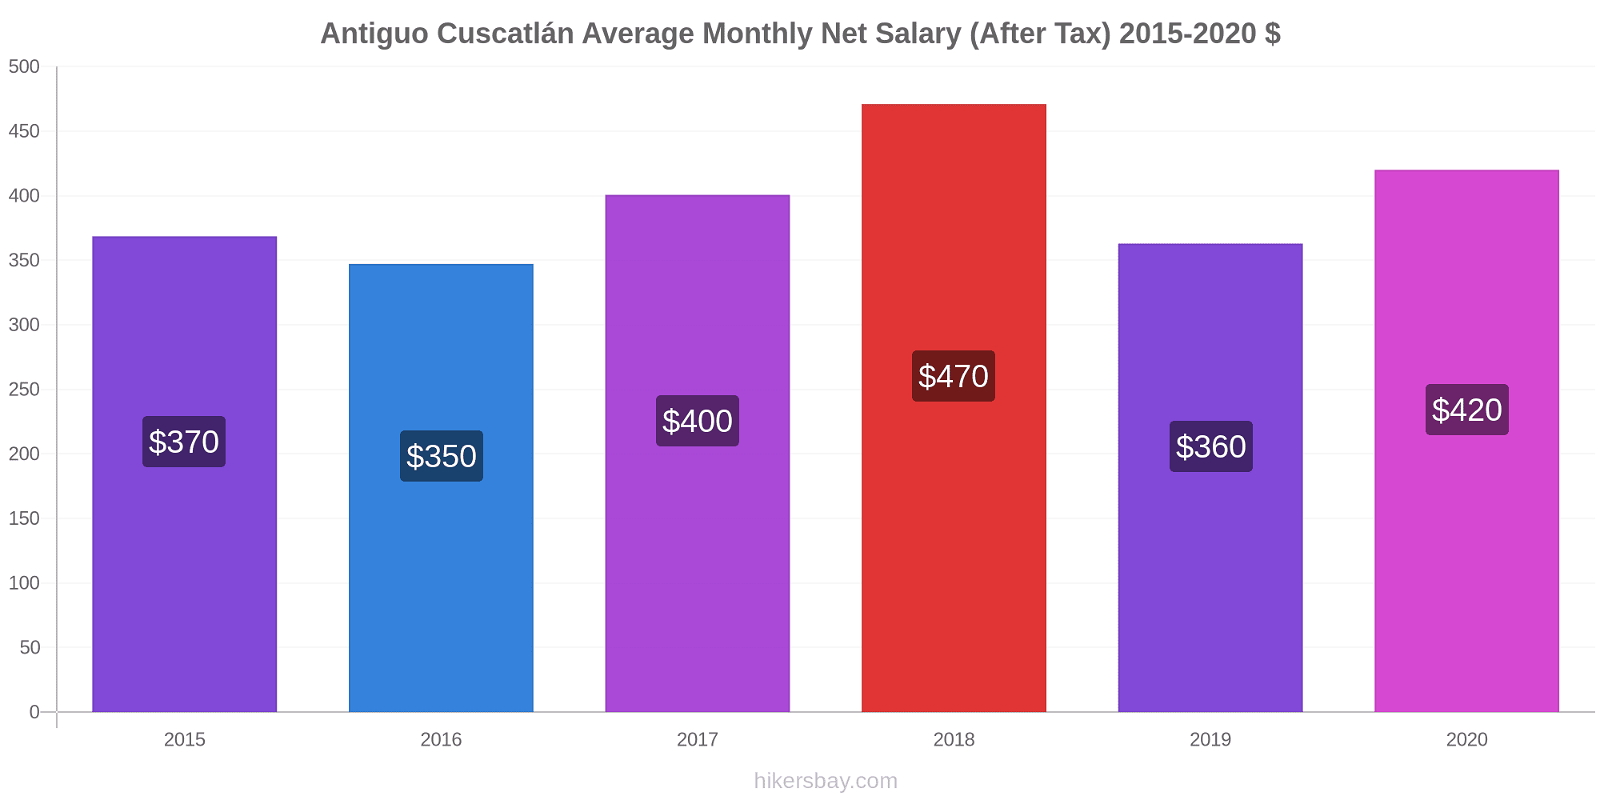 Antiguo Cuscatlán price changes Average Monthly Net Salary (After Tax) hikersbay.com